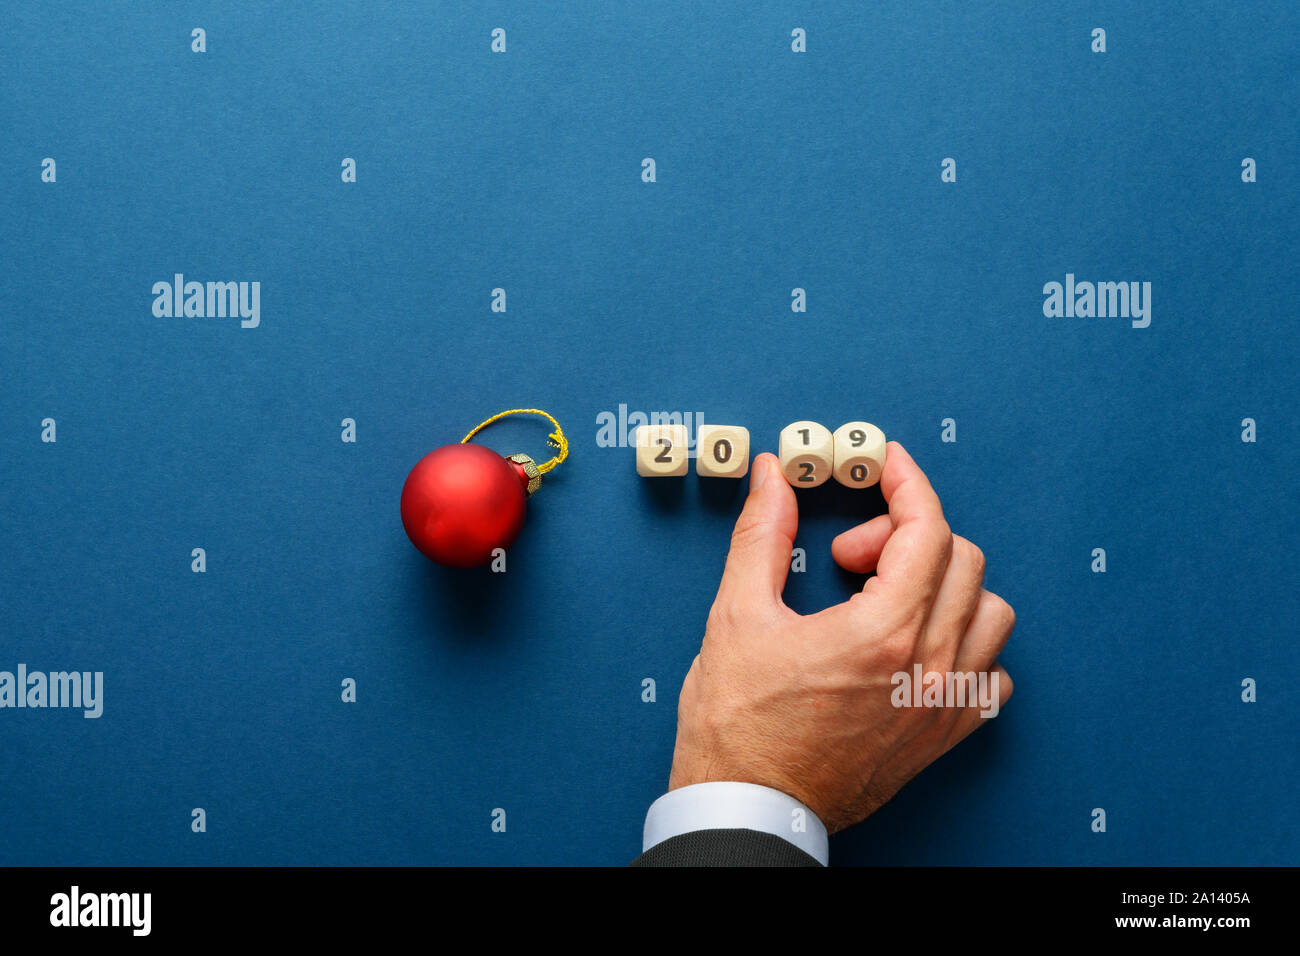 Red holiday bauble next to a 2019 sign on wooden dices with male hand turning the last two dices to change the date in 20120. Over navy blue backgroun Stock Photo